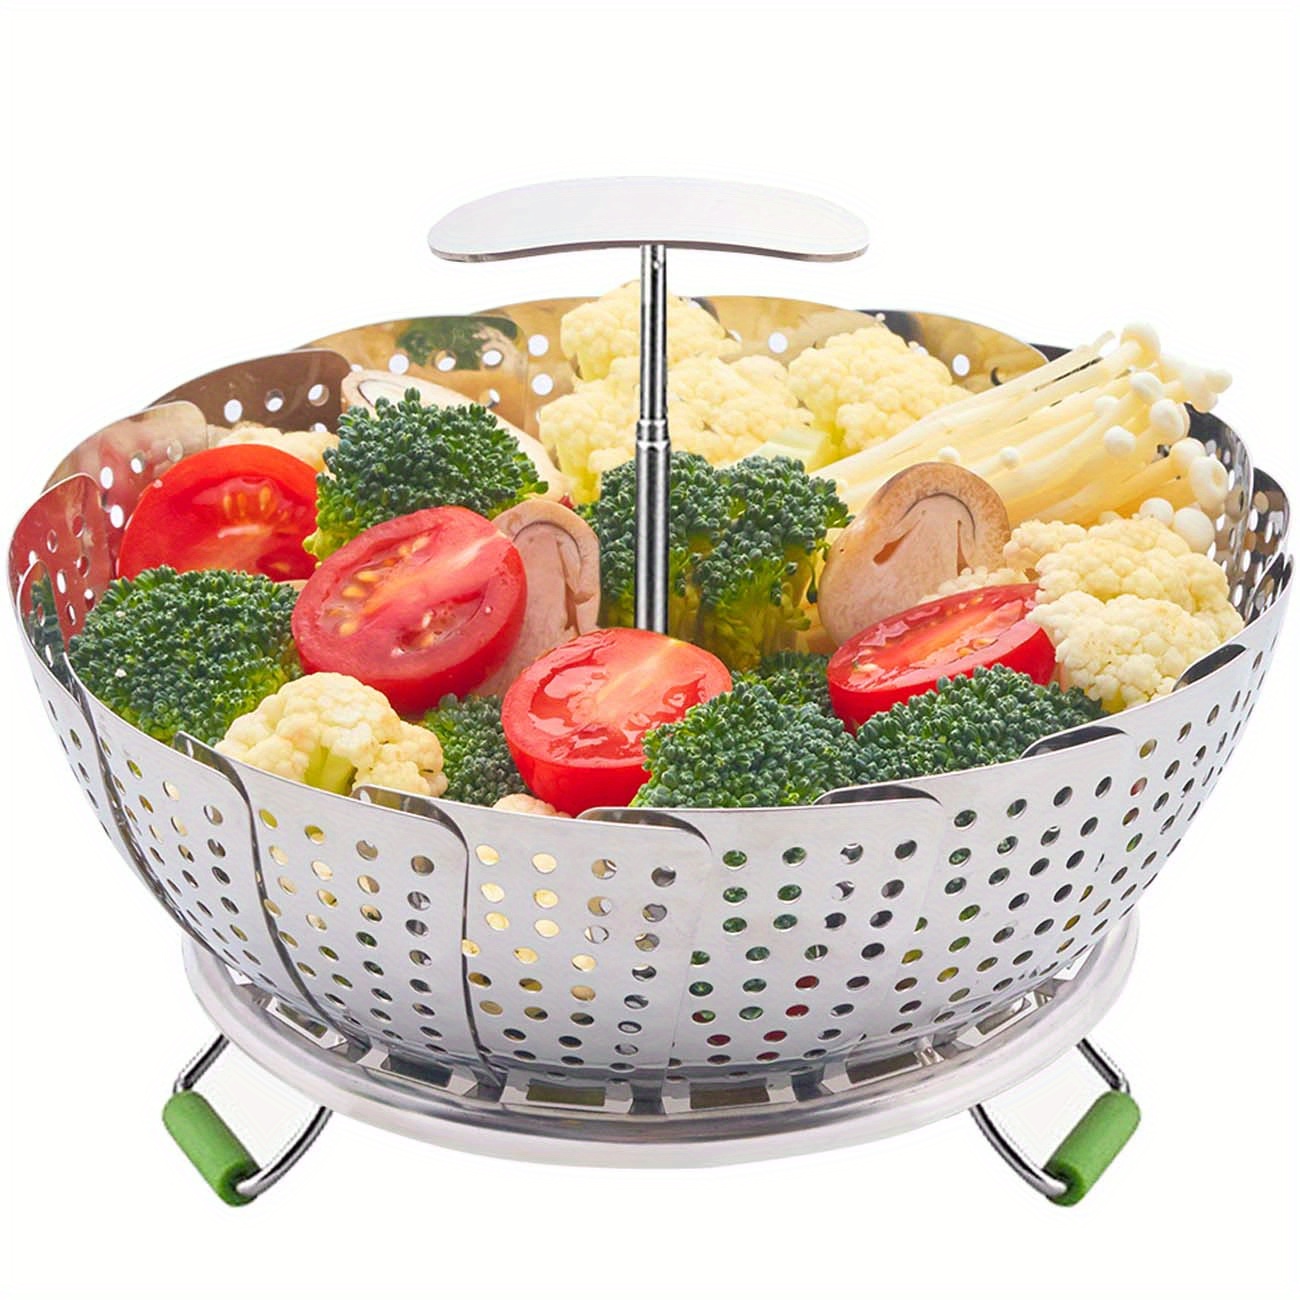 Metal Wire Mesh Steamer Basket with Handles for Vegetables, Eggs, etc.